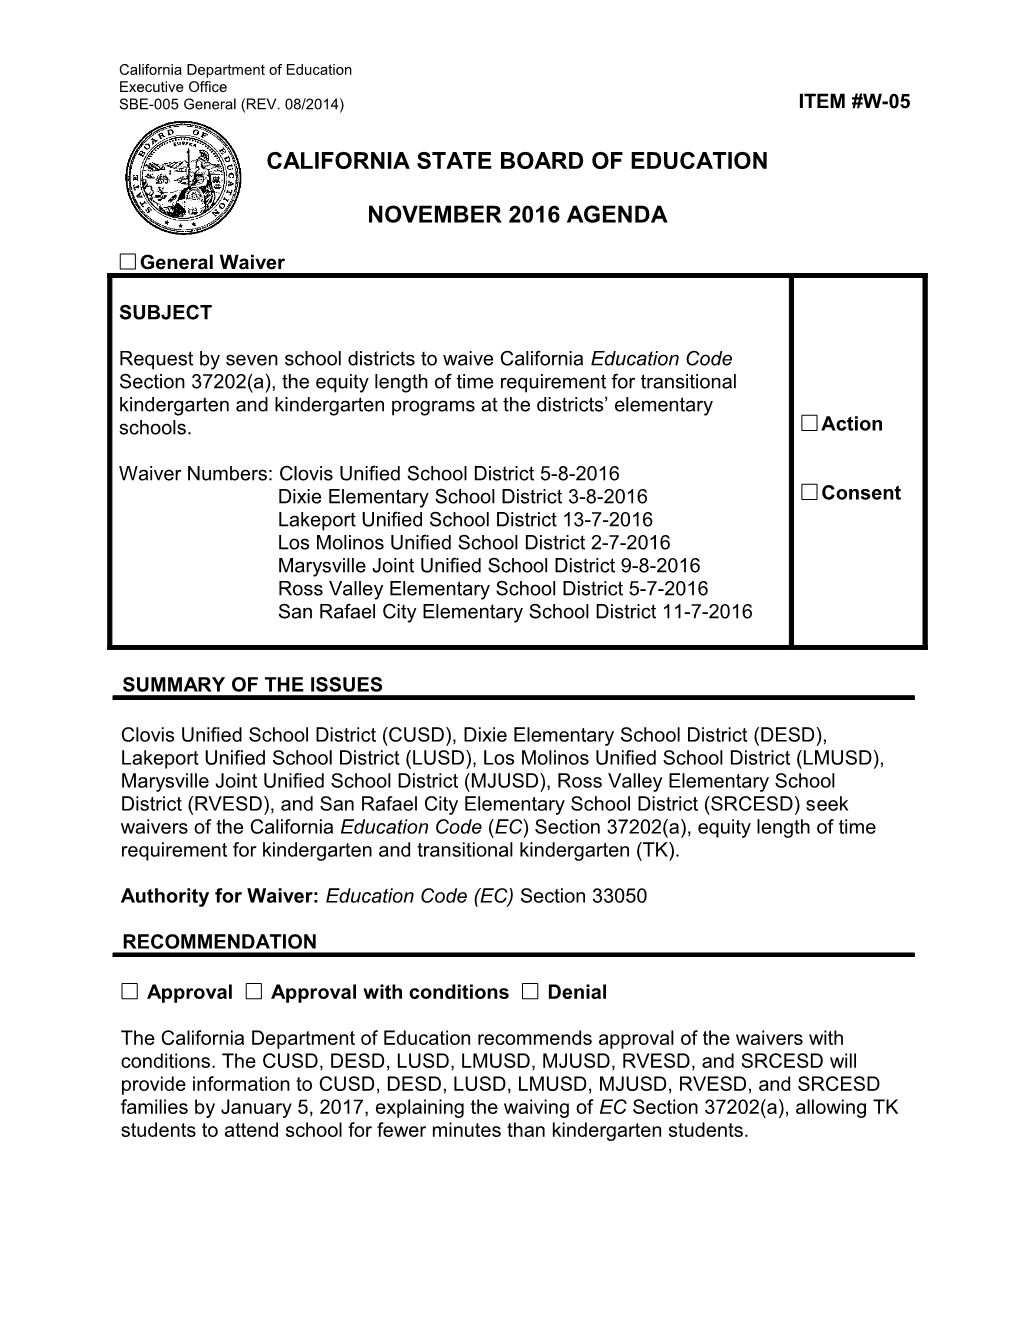 November 2016 Waiver Item W-05 - Meeting Agendas (CA State Board of Education)